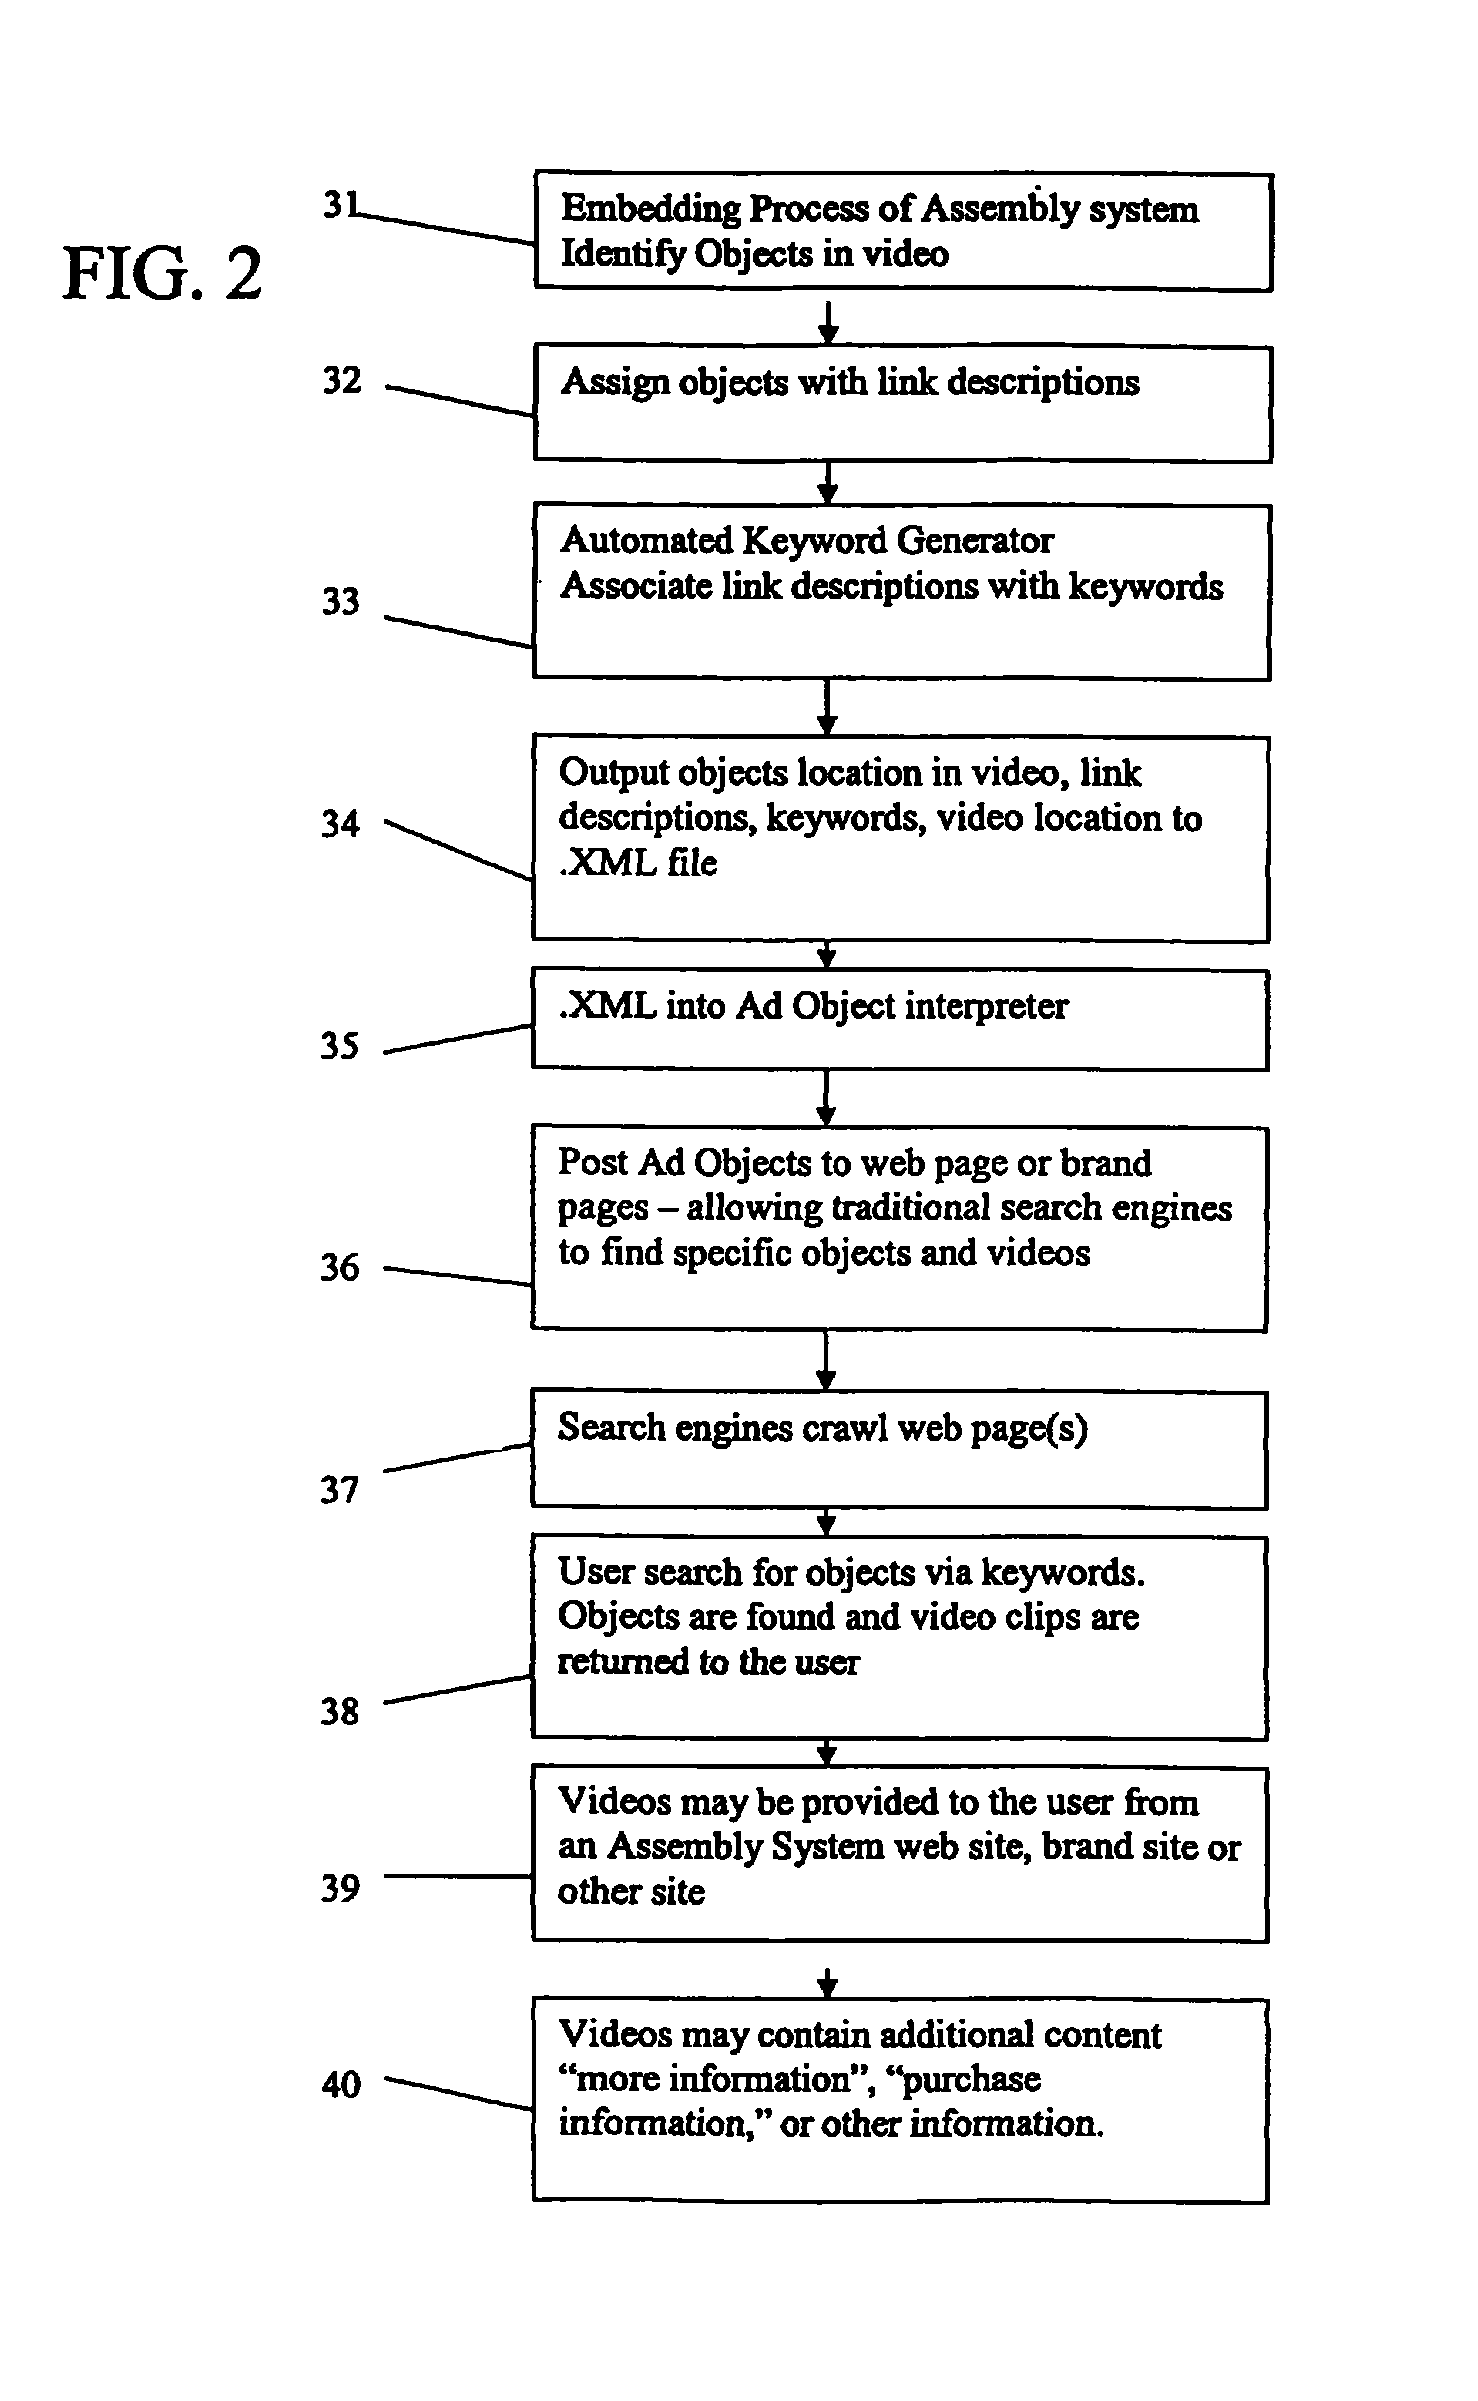 System and method for enabling objects within video to be searched on the internet or intranet